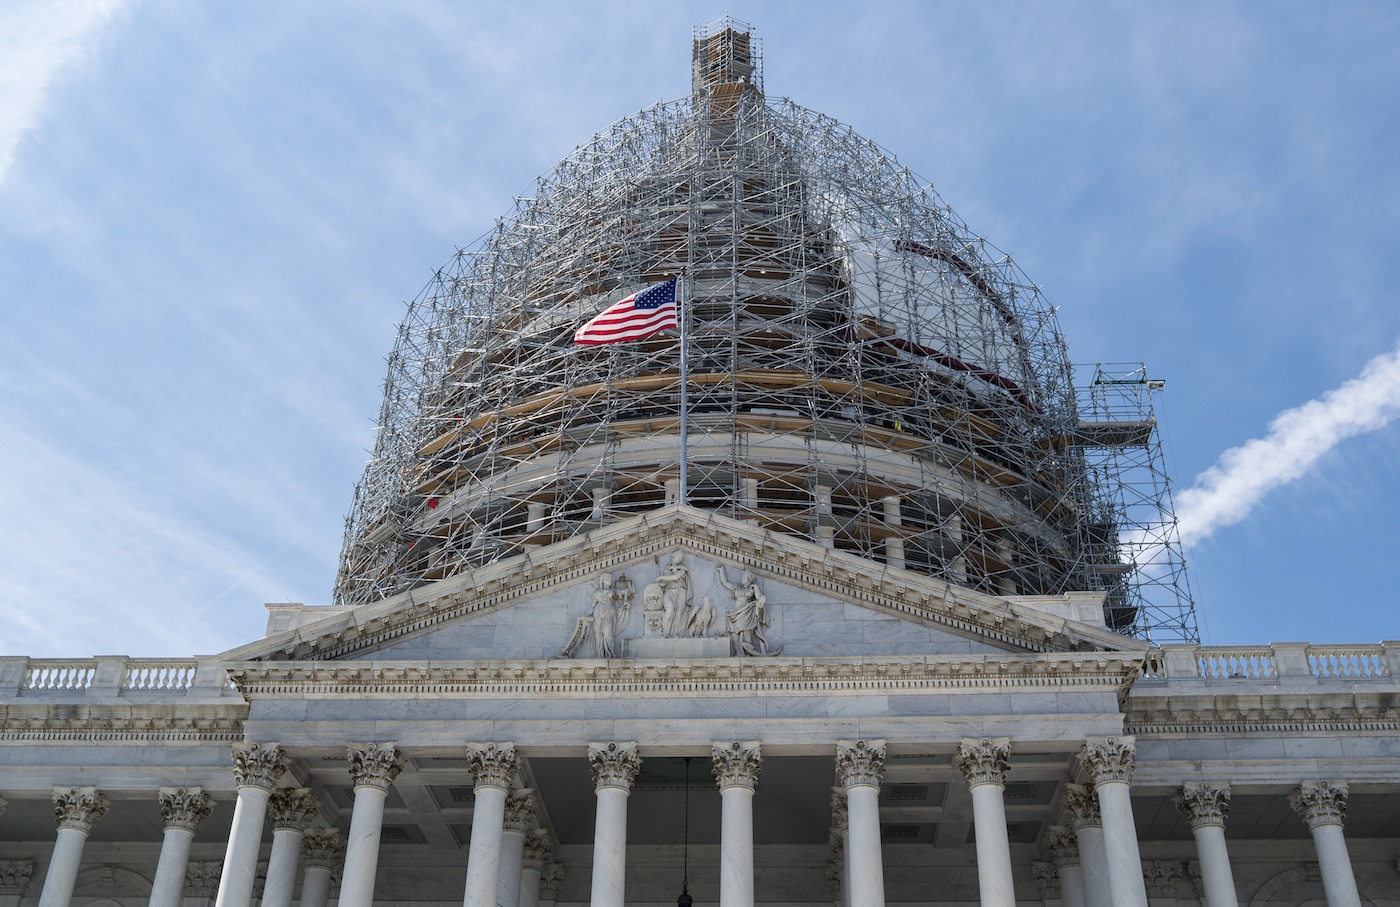 The dome of the Capitol Building in Washington, D.C., under renovation.